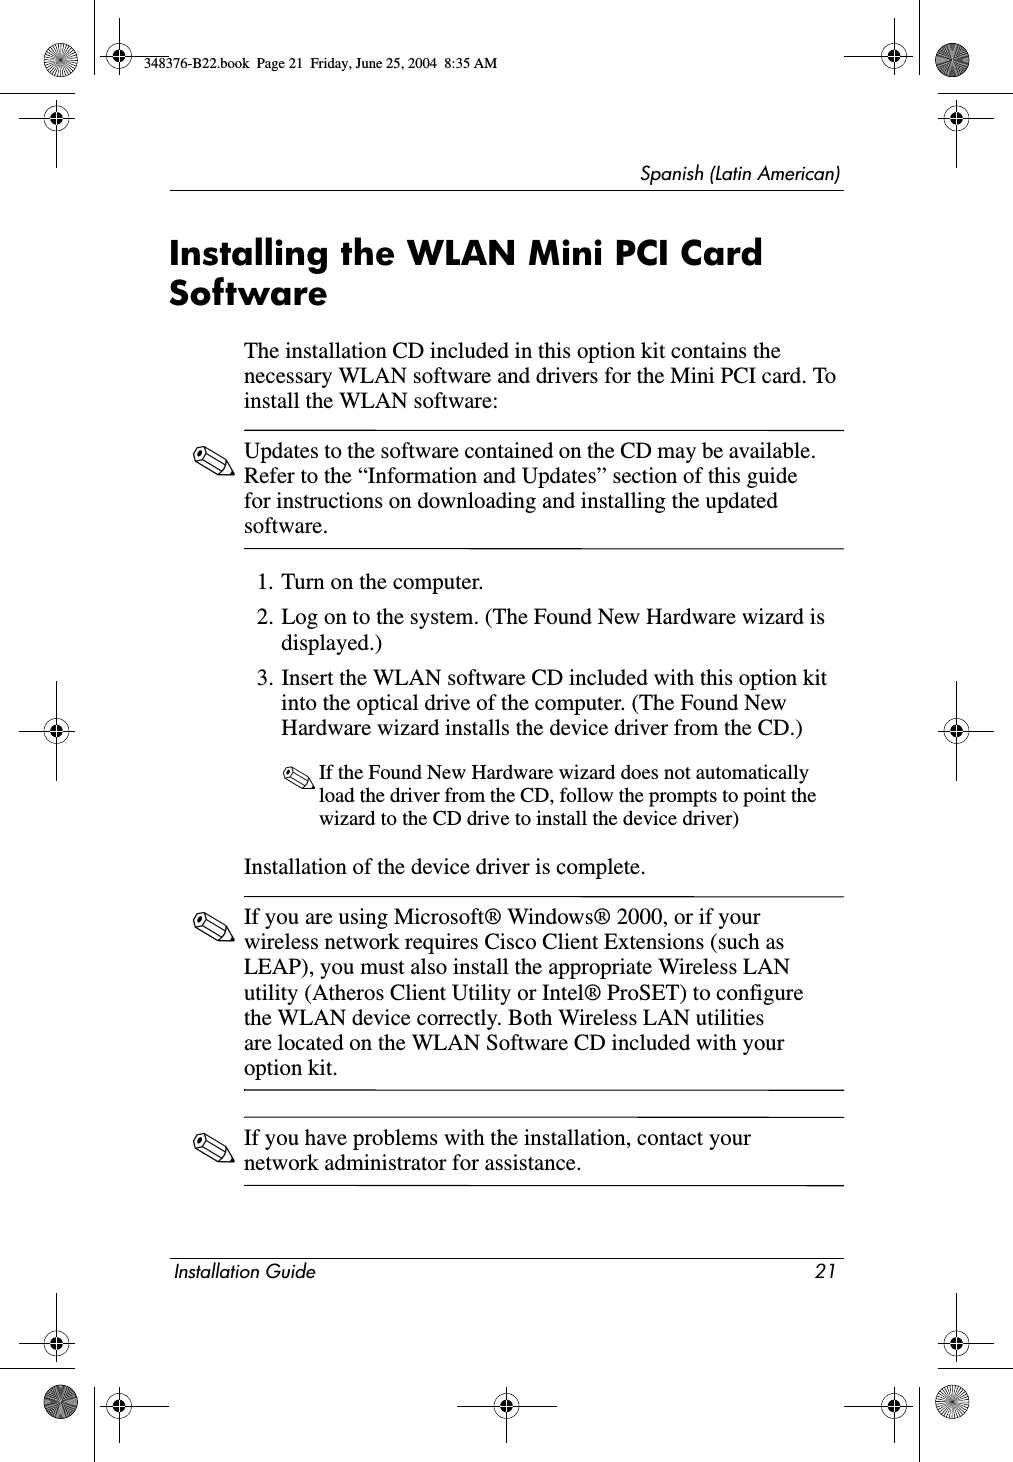 Spanish (Latin American)Installation Guide 21Installing the WLAN Mini PCI Card SoftwareThe installation CD included in this option kit contains the necessary WLAN software and drivers for the Mini PCI card. To install the WLAN software: ✎Updates to the software contained on the CD may be available. Refer to the “Information and Updates” section of this guide for instructions on downloading and installing the updated software.1. Turn on the computer.2. Log on to the system. (The Found New Hardware wizard is displayed.)3. Insert the WLAN software CD included with this option kit into the optical drive of the computer. (The Found New Hardware wizard installs the device driver from the CD.)✎If the Found New Hardware wizard does not automatically load the driver from the CD, follow the prompts to point the wizard to the CD drive to install the device driver)Installation of the device driver is complete.✎If you are using Microsoft® Windows® 2000, or if your wireless network requires Cisco Client Extensions (such as LEAP), you must also install the appropriate Wireless LAN utility (Atheros Client Utility or Intel® ProSET) to configure the WLAN device correctly. Both Wireless LAN utilities are located on the WLAN Software CD included with your option kit. ✎If you have problems with the installation, contact your network administrator for assistance.348376-B22.book  Page 21  Friday, June 25, 2004  8:35 AM